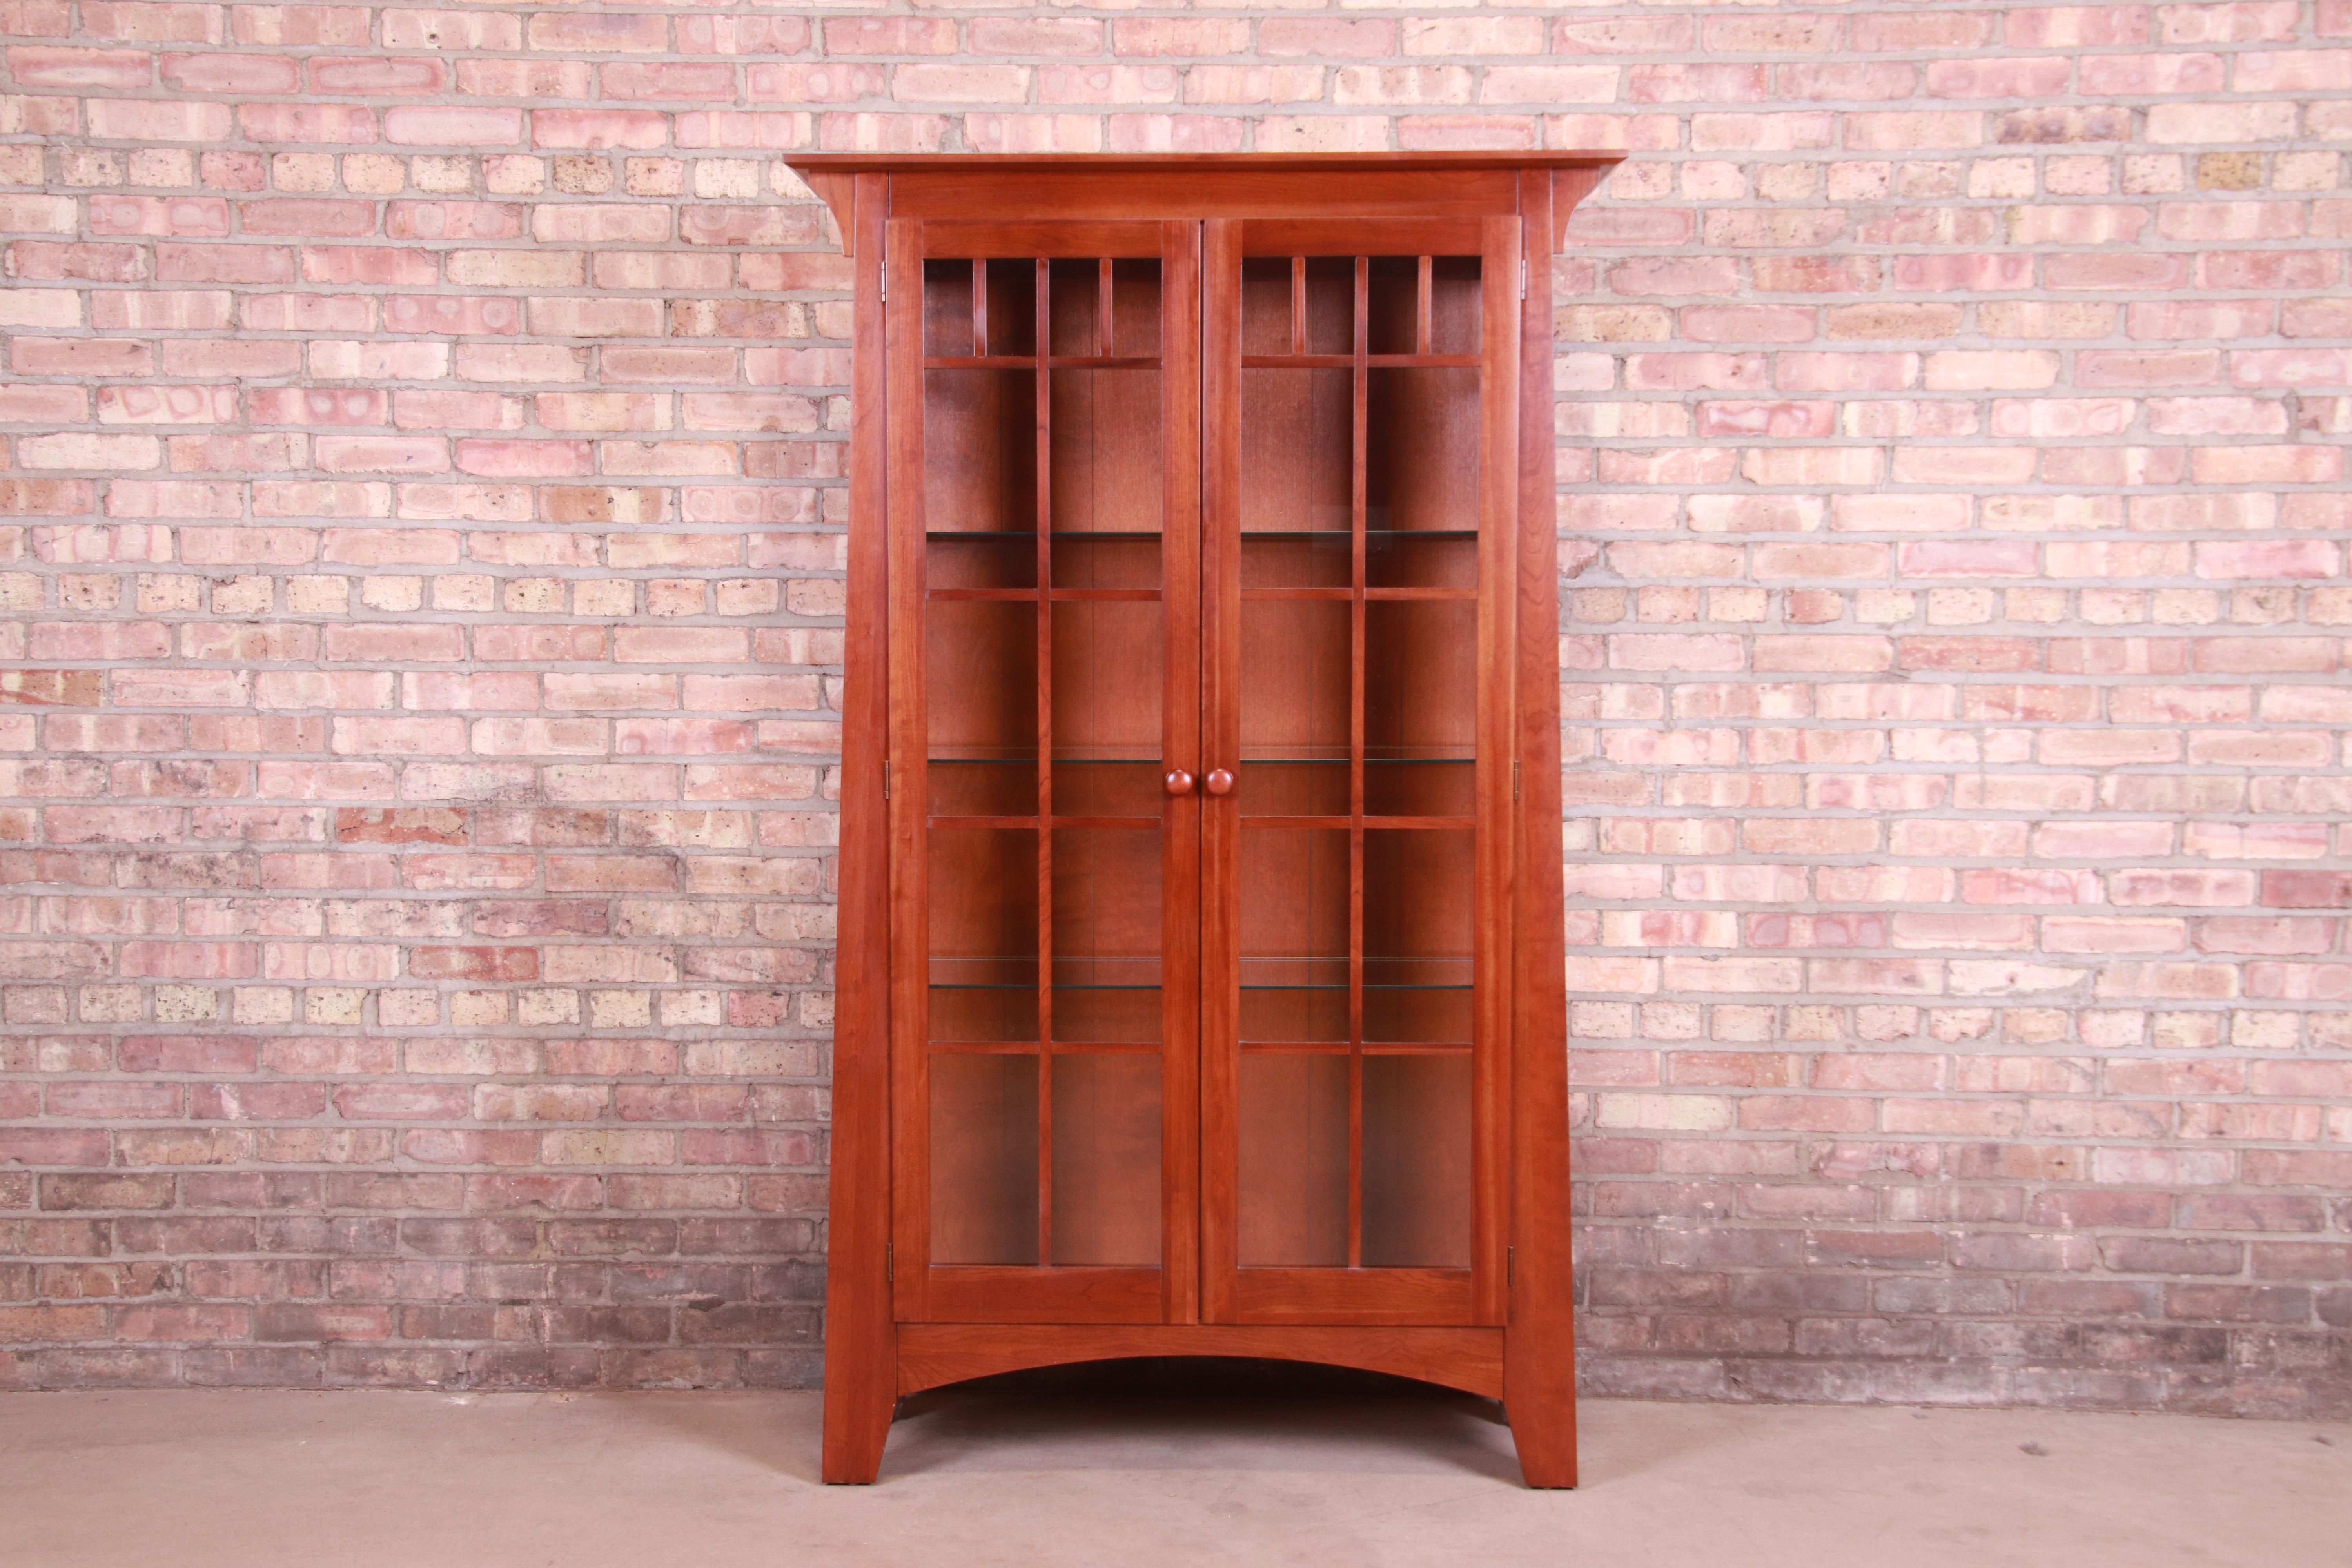 A gorgeous Mission or Arts & Crafts style lighted display cabinet or bookcase

In the manner of Gustav Stickley or Harvey Ellis

By Ethan Allen

USA, Circa 1990s

Solid cherry wood, with mullioned glass front and sides.

Measures: 43.13